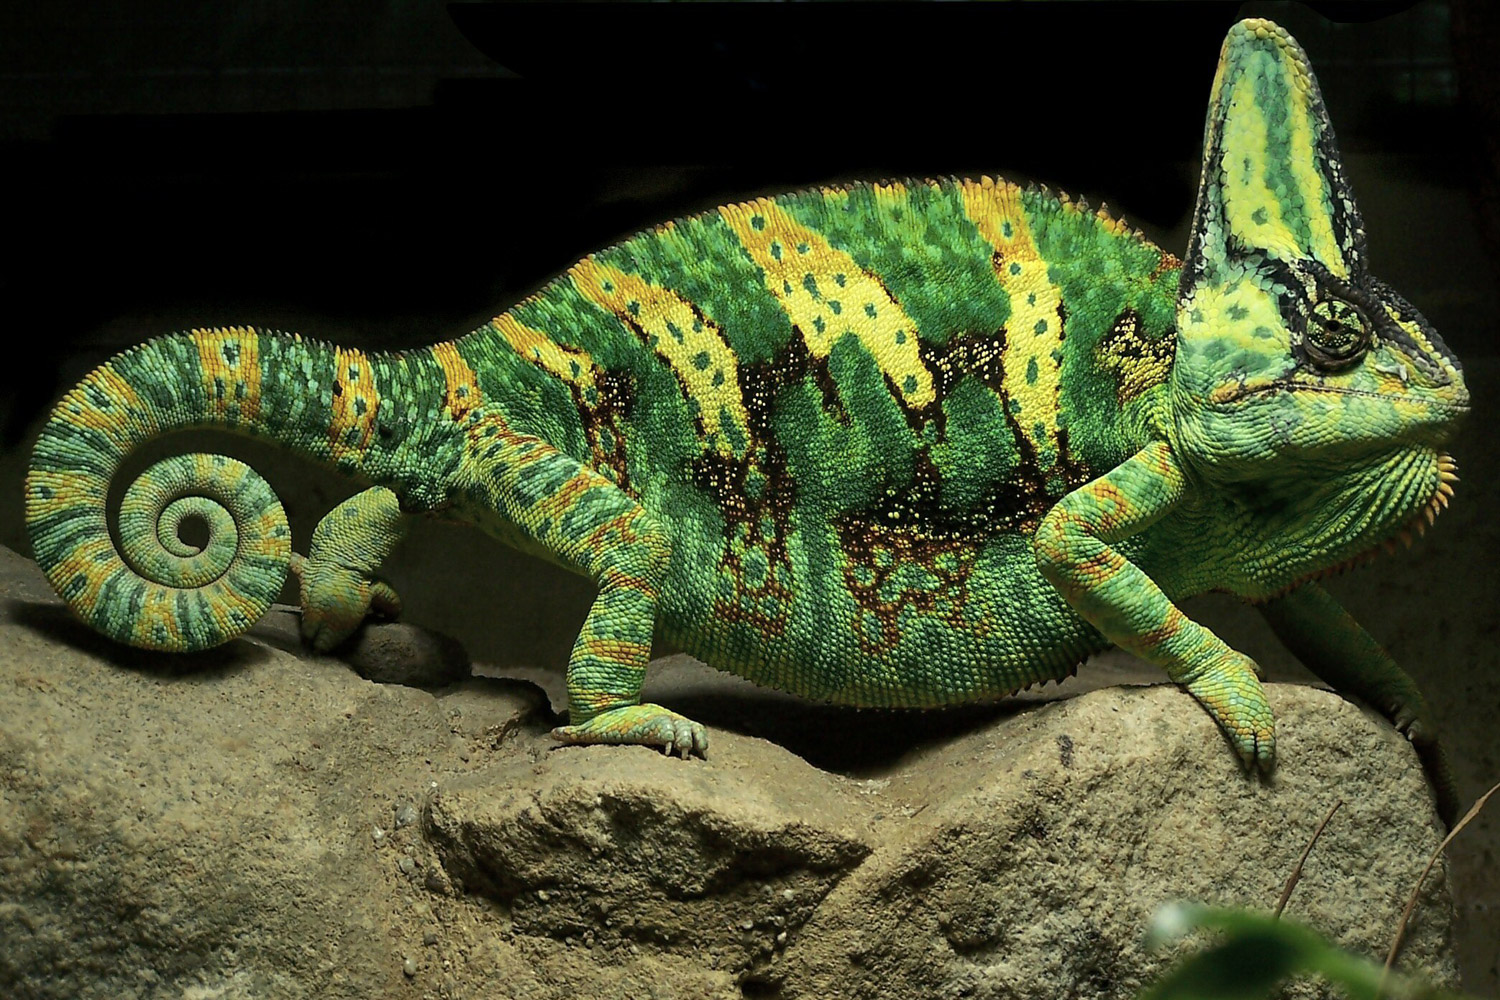 What do reptiles and mammals have in common?